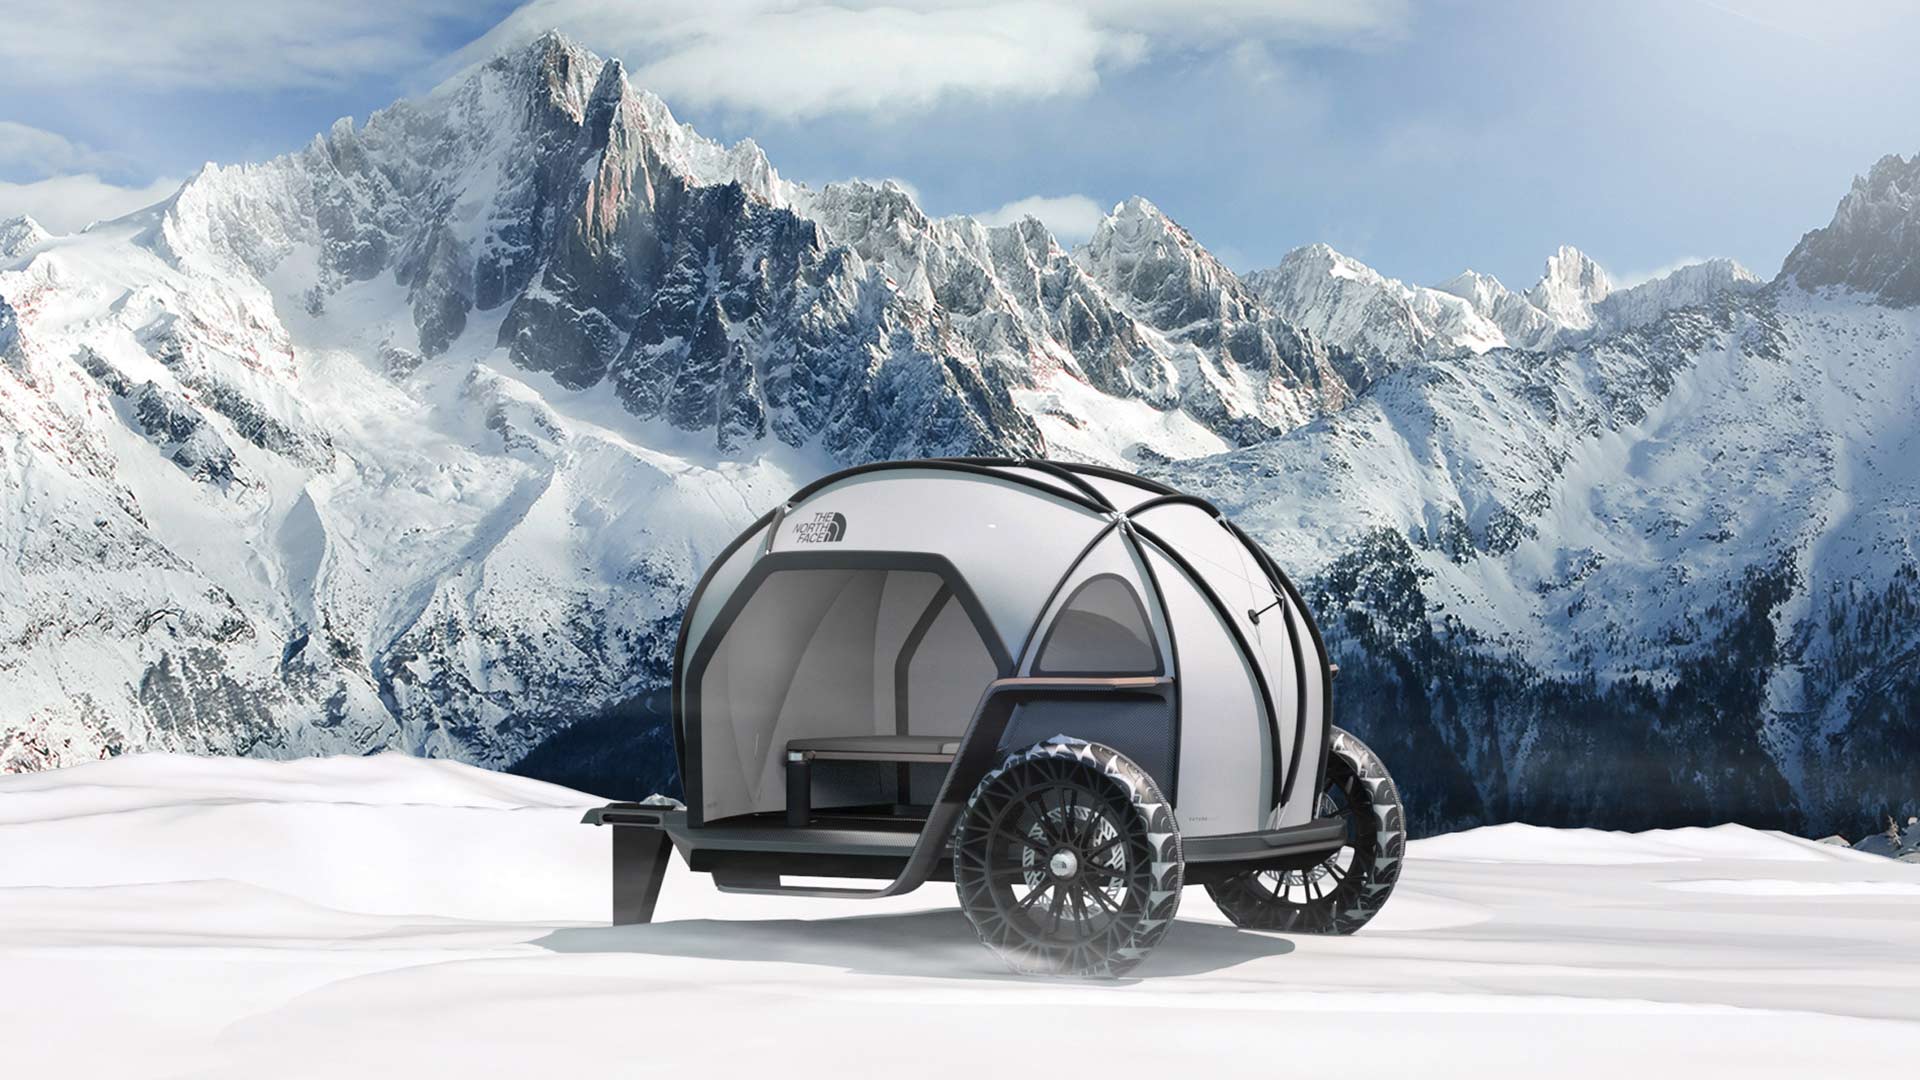 BMW and The North Face have collaborated on this epic Tent On Wheels…